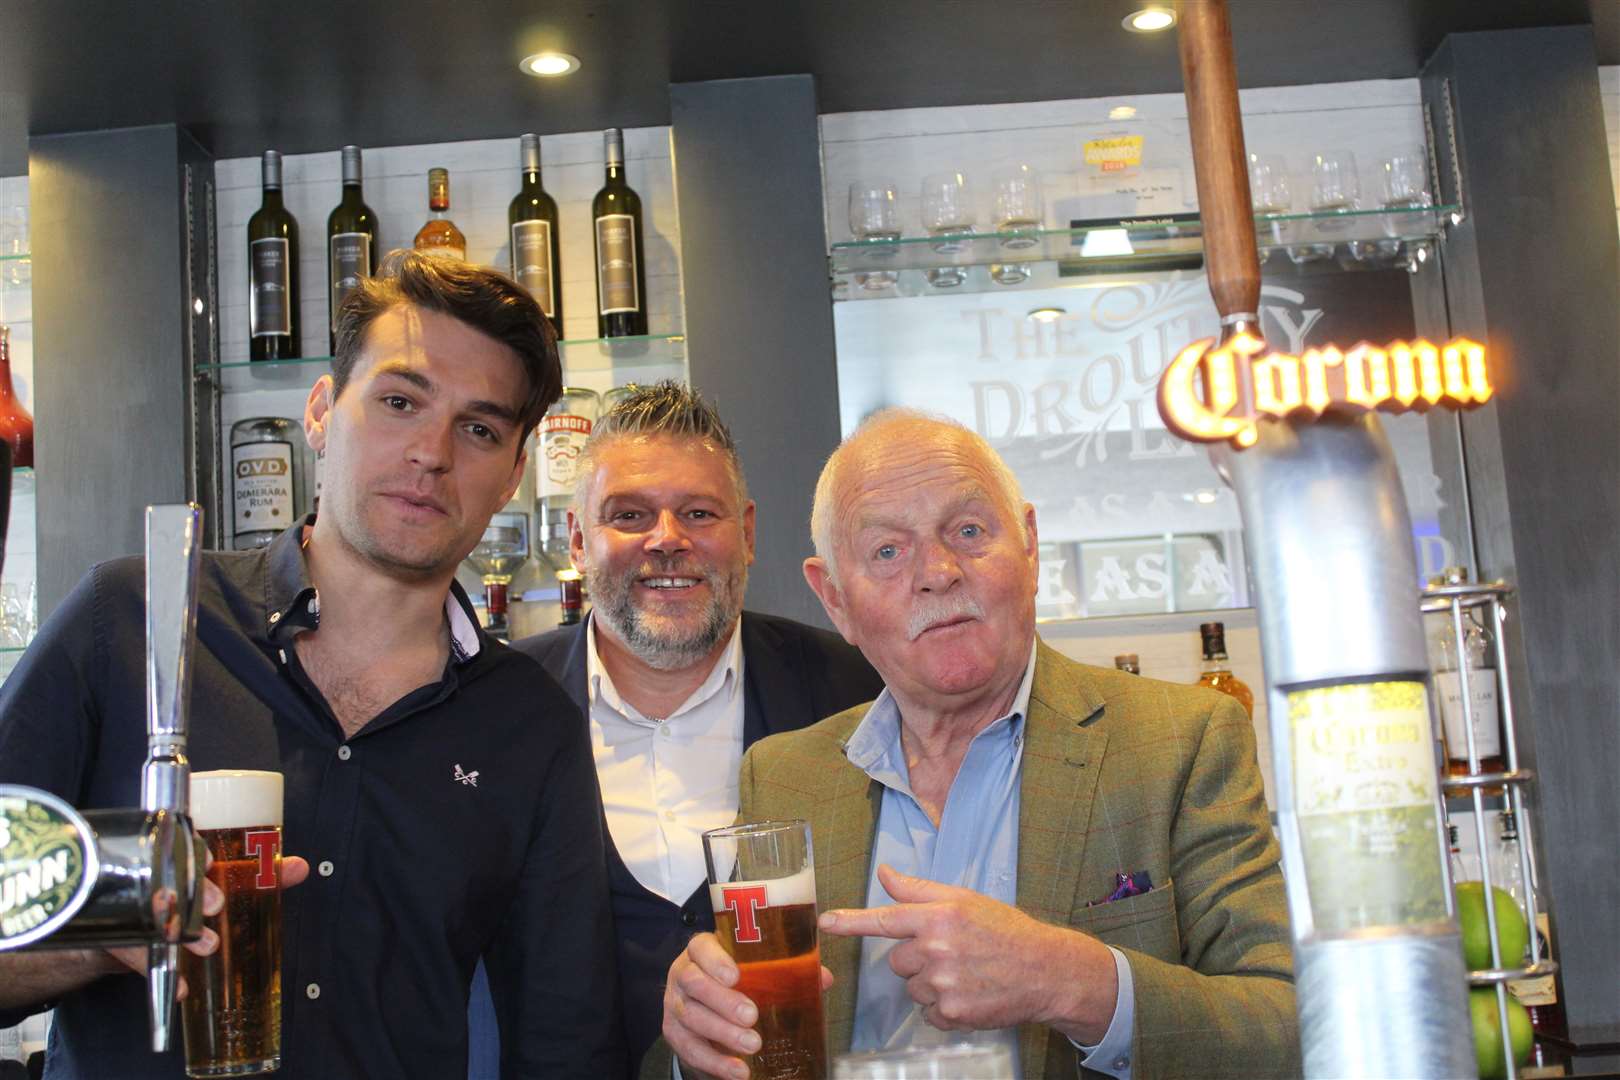 Emmerdale stars Lawrence Boyd (left) and Chris Chittal were welcomed to the Drouthy Laird by mine host Laird Parker on Saturday. Picture: Griselda McGregor